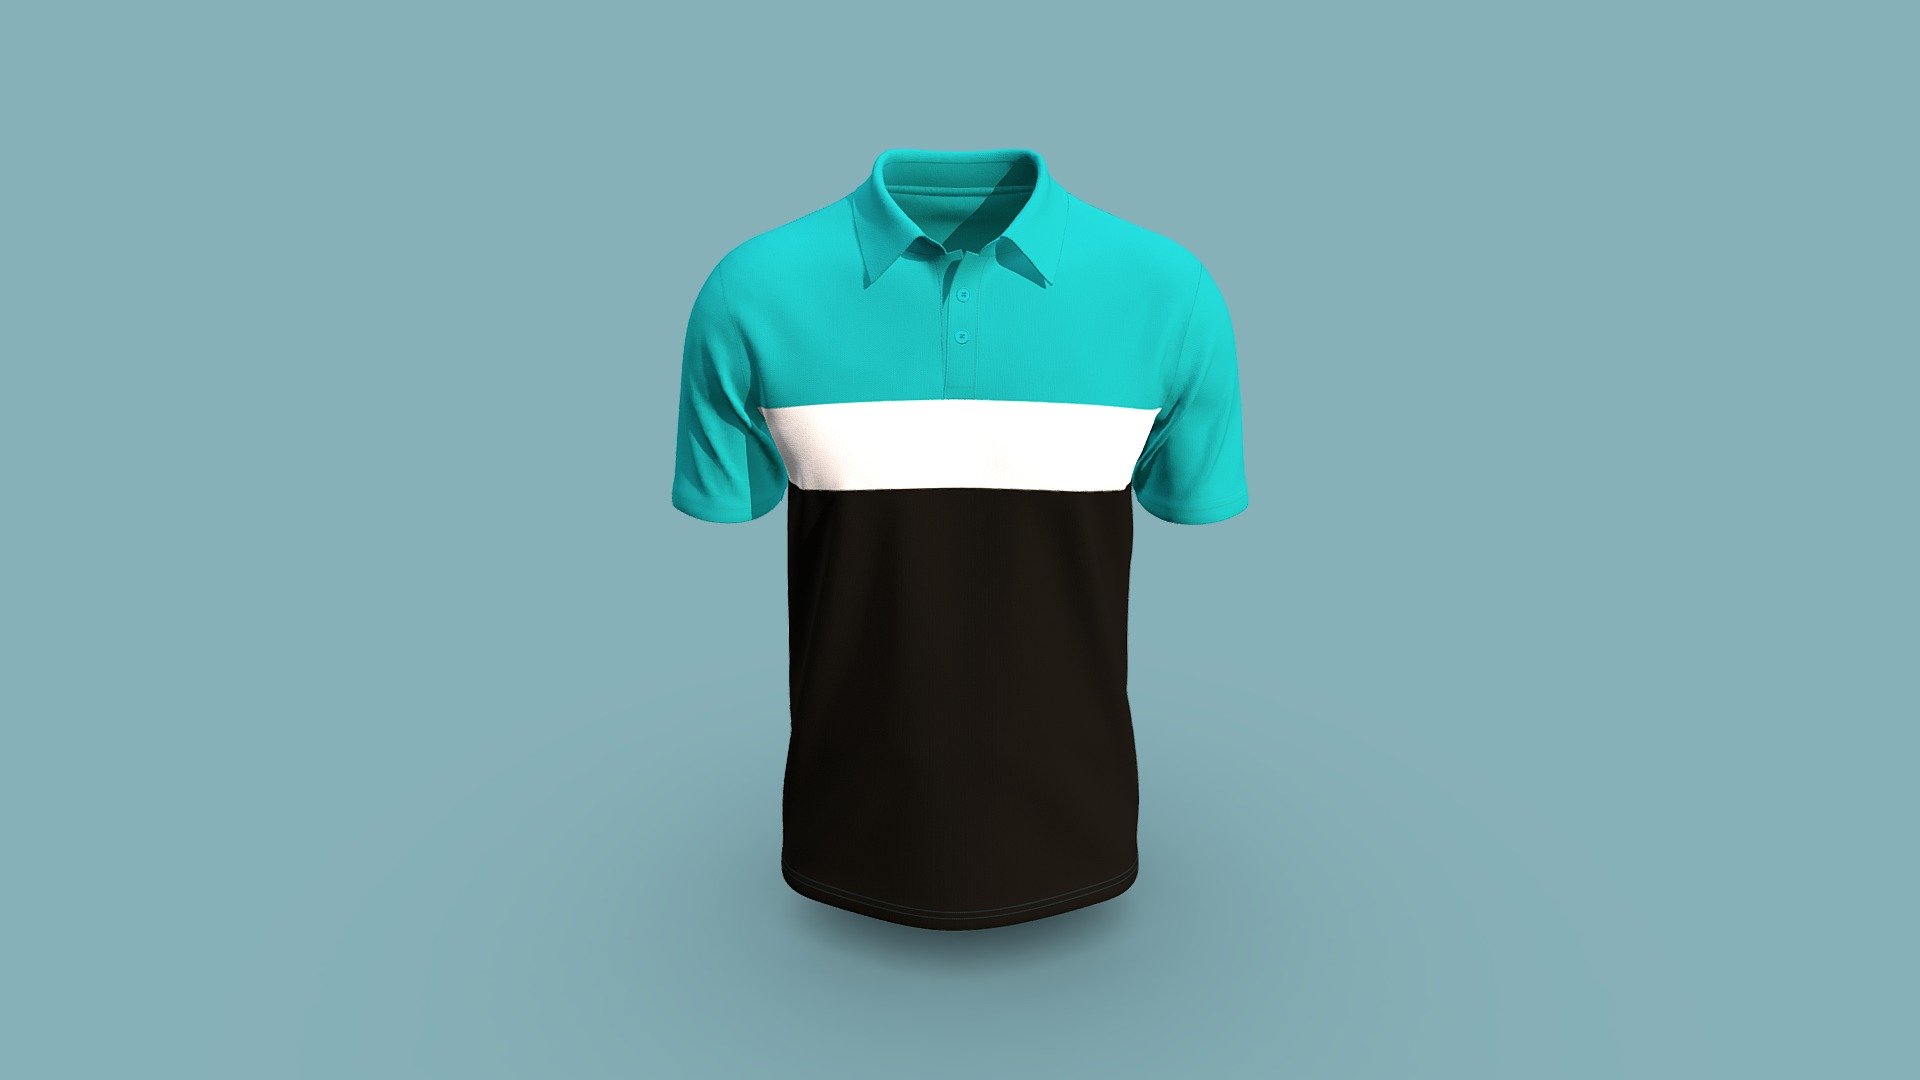 Cloth Title = Polo Shirt Design 

SKU = DG100202 

Category = Men 

Product Type = Polo 

Cloth Length = Regular 

Body Fit = Regular Fit 

Occasion = Casual  

Sleeve Style = Short Sleeve 


Our Services:

3D Apparel Design.

OBJ,FBX,GLTF Making with High/Low Poly.

Fabric Digitalization.

Mockup making.

3D Teck Pack.

Pattern Making.

2D Illustration.

Cloth Animation and 360 Spin Video.


Contact us:- 

Email: info@digitalfashionwear.com 

Website: https://digitalfashionwear.com 


We designed all the types of cloth specially focused on product visualization, e-commerce, fitting, and production. 

We will design: 

T-shirts 

Polo shirts 

Hoodies 

Sweatshirt 

Jackets 

Shirts 

TankTops 

Trousers 

Bras 

Underwear 

Blazer 

Aprons 

Leggings 

and All Fashion items. 





Our goal is to make sure what we provide you, meets your demand 3d model